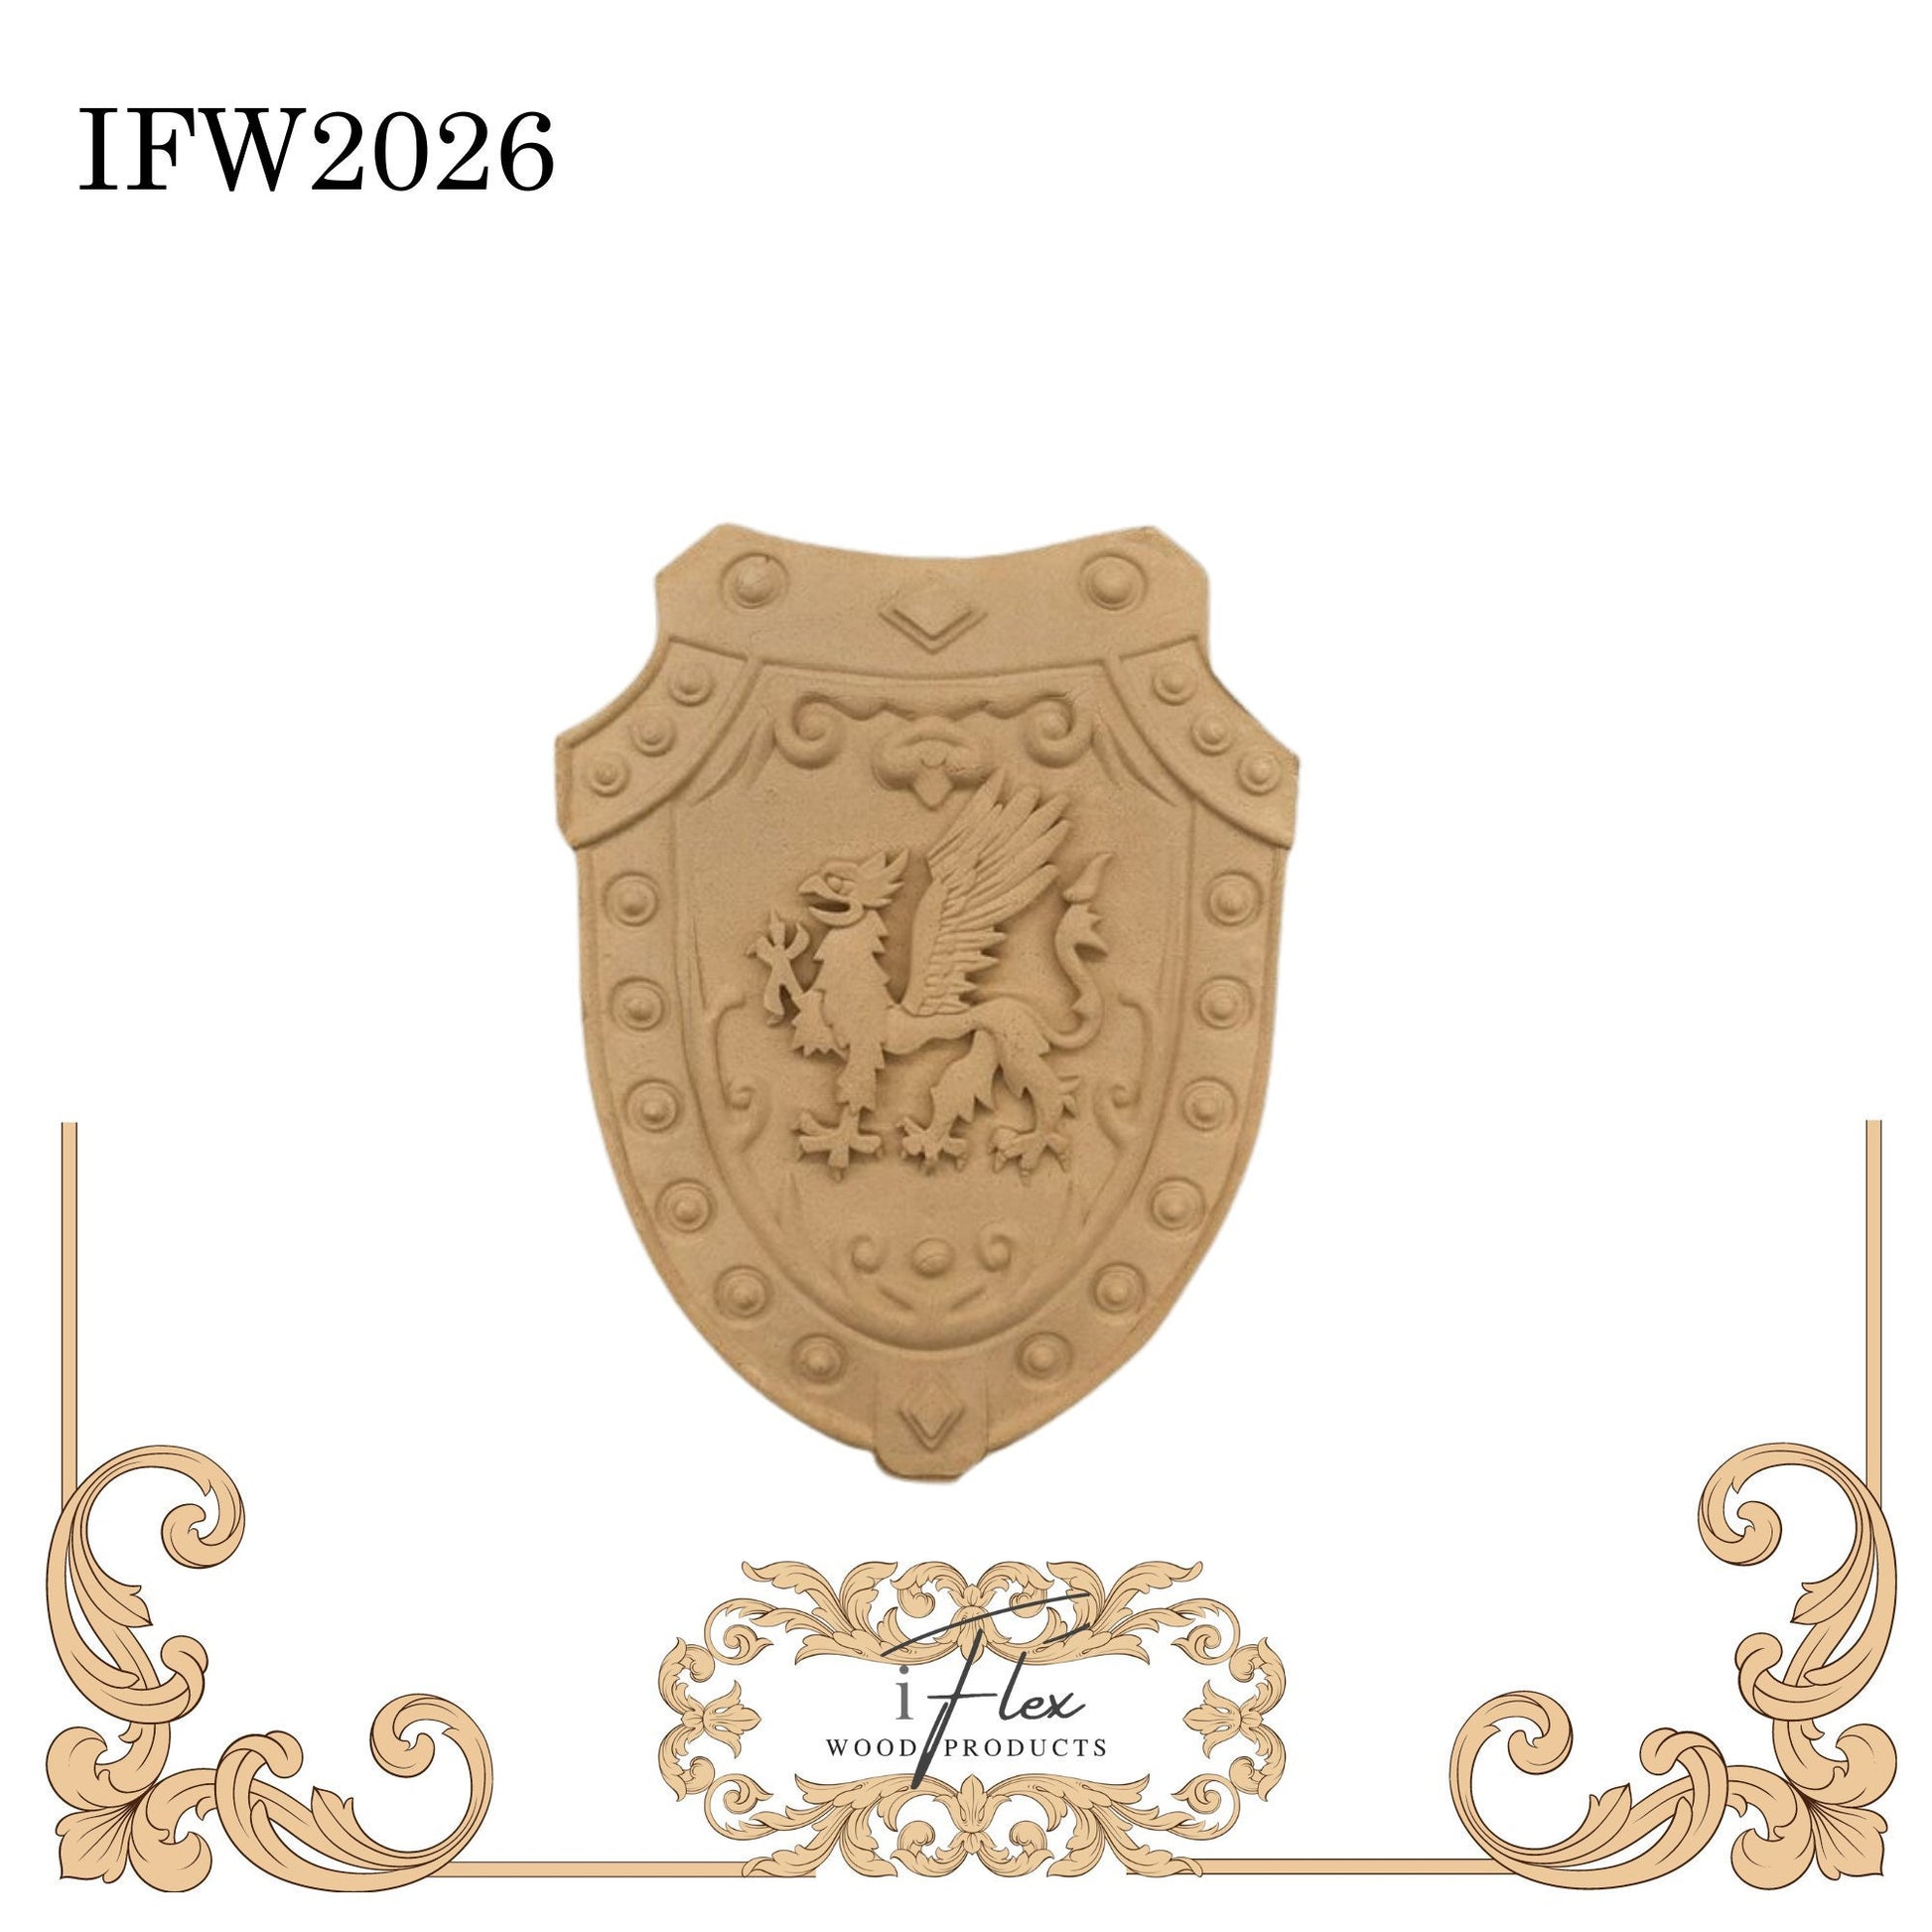 IFW 2026 iFlex Wood Products, bendable mouldings, flexible, wooden appliques, shield, misc